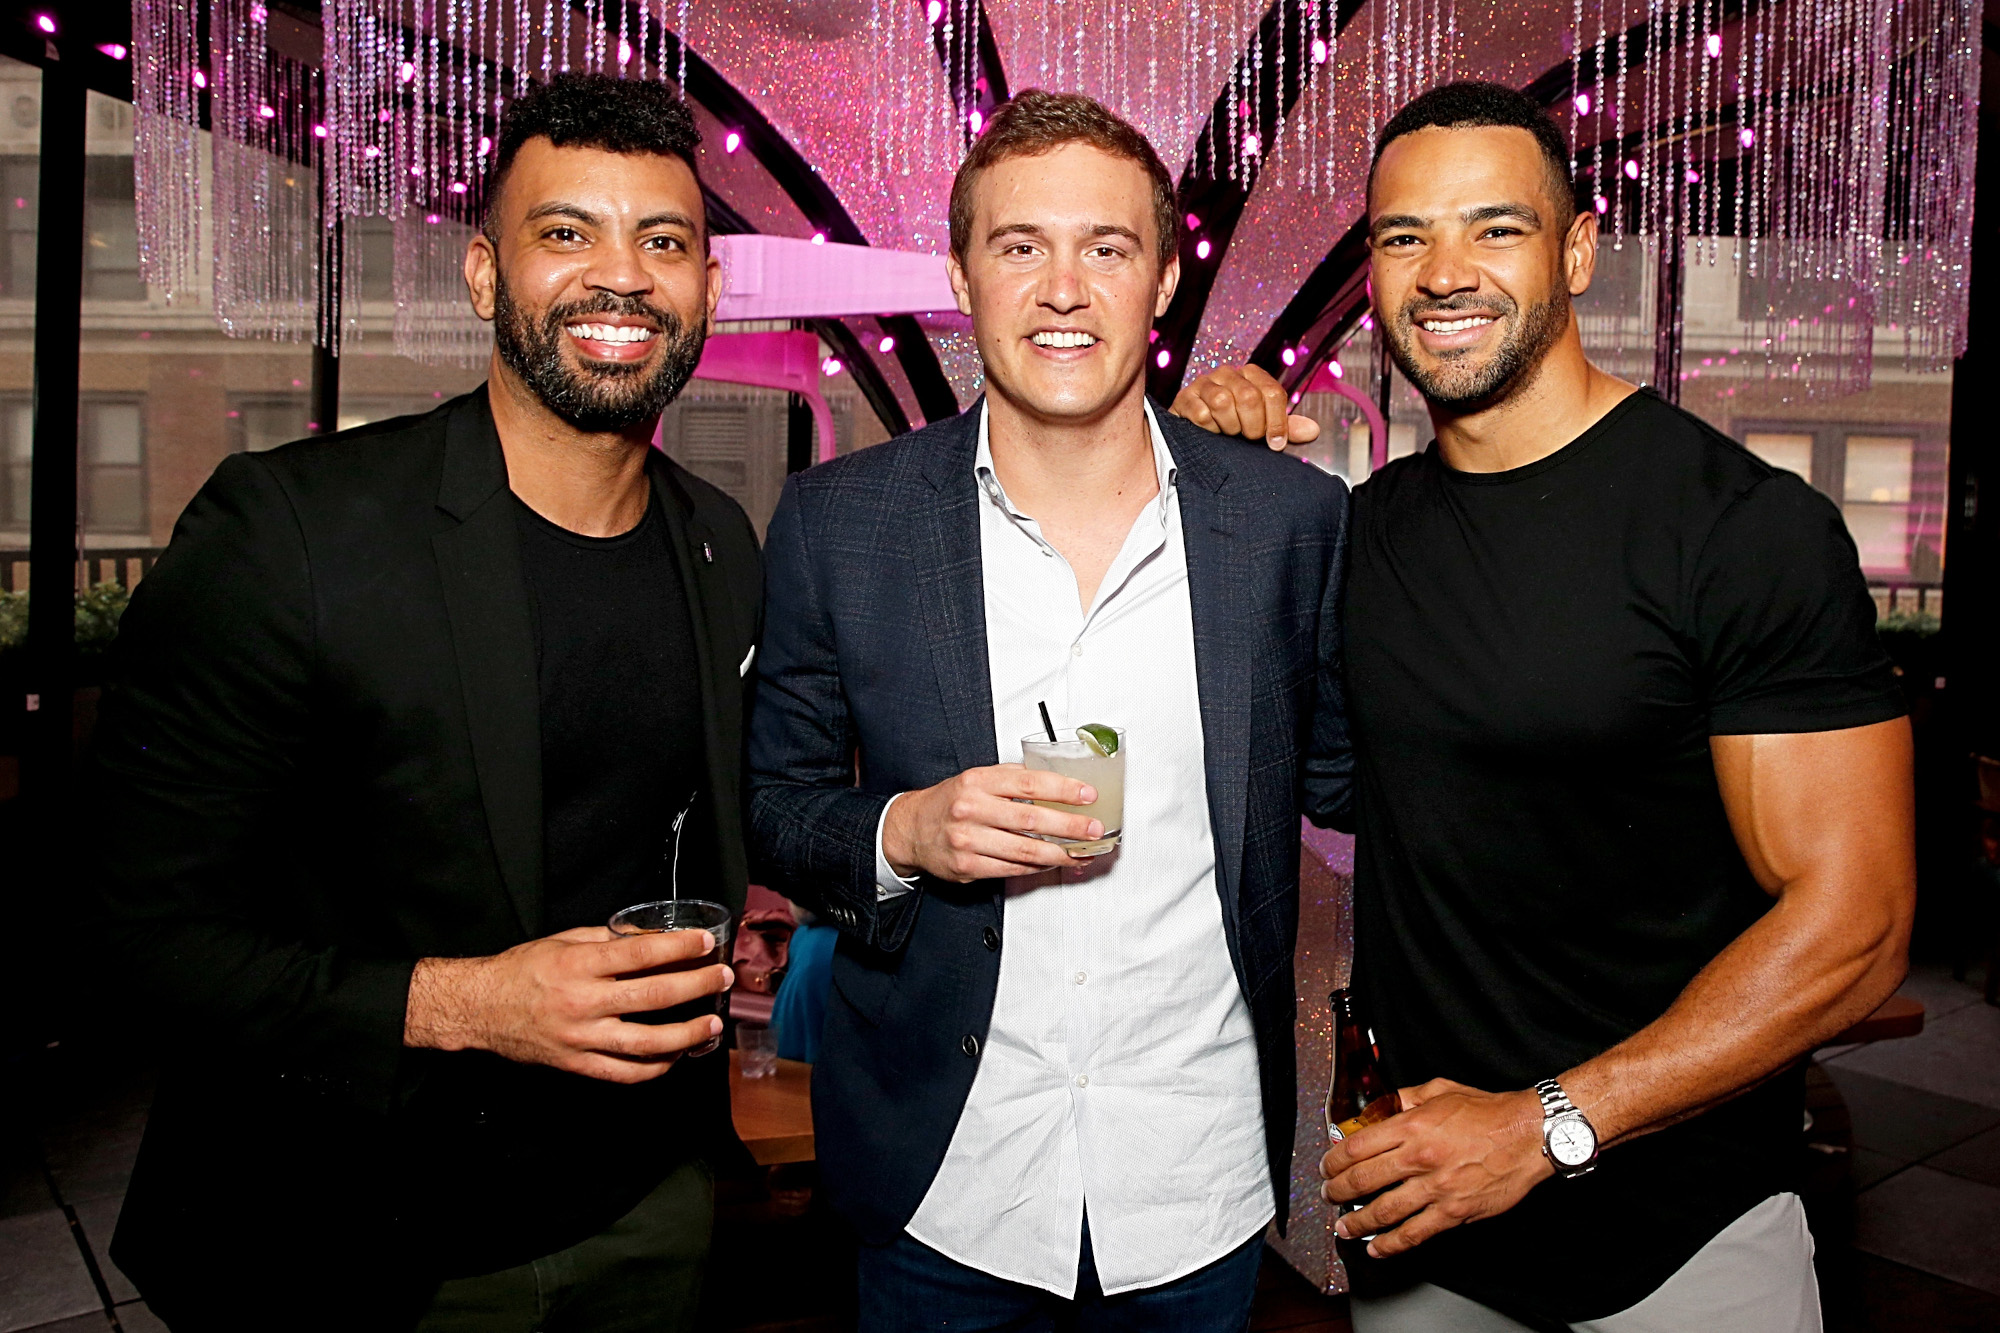 'The Bachelor' alums Dustin Kendrick, Peter Weber, and Clay Harbor. They're standing next to one another, holding drinks, and smiling.